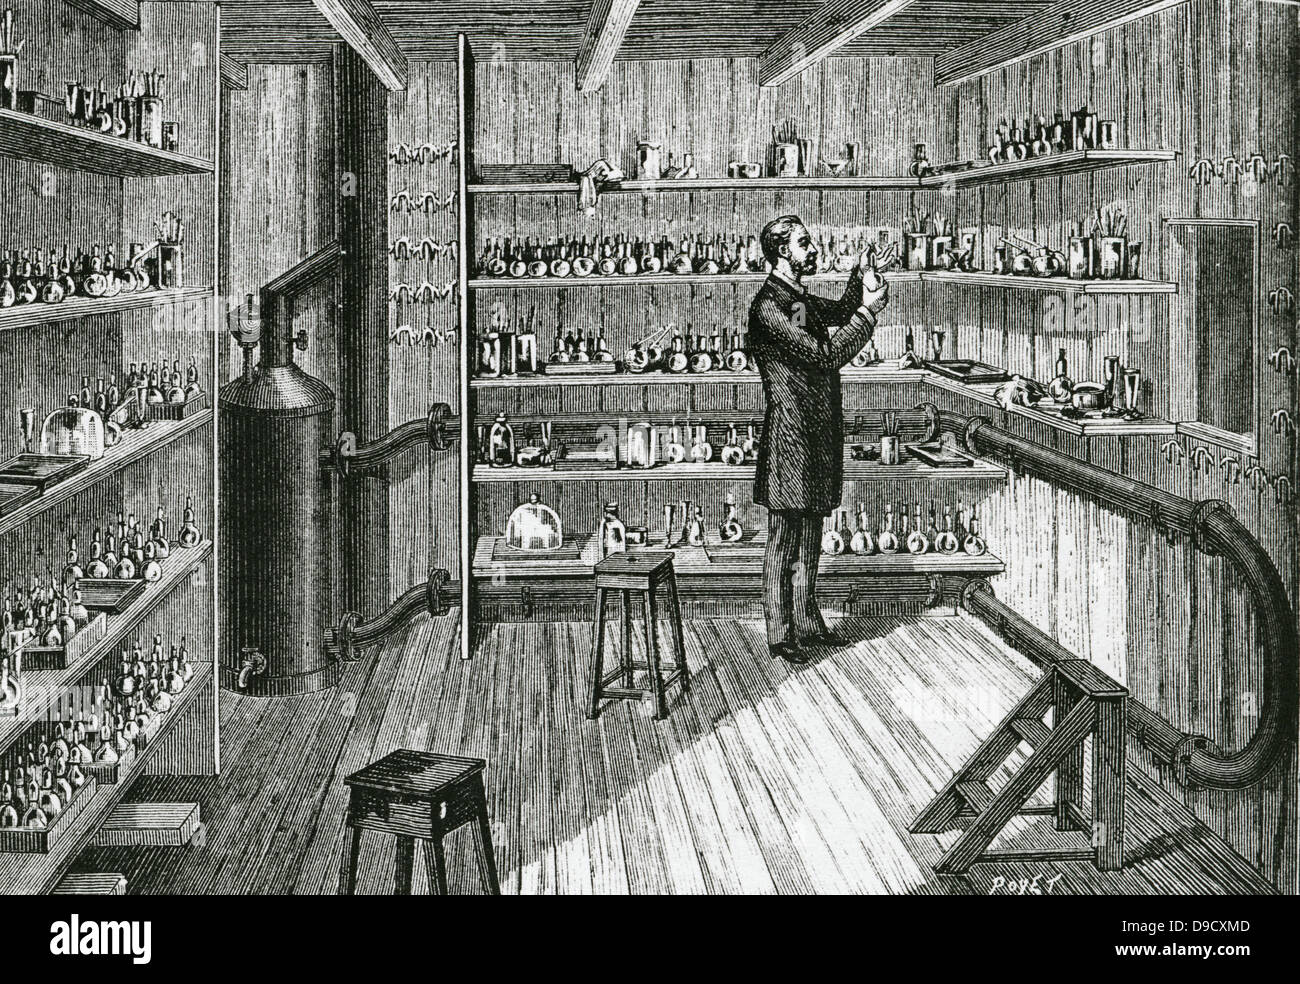 Louis Pasteurs (1822-1895) laboratory at the Ecole Normale, Paris: the room where cultures were kept at a constant temperature during his work on hydrophobia (Rabies).  La Nature, Paris, 1884. Stock Photo